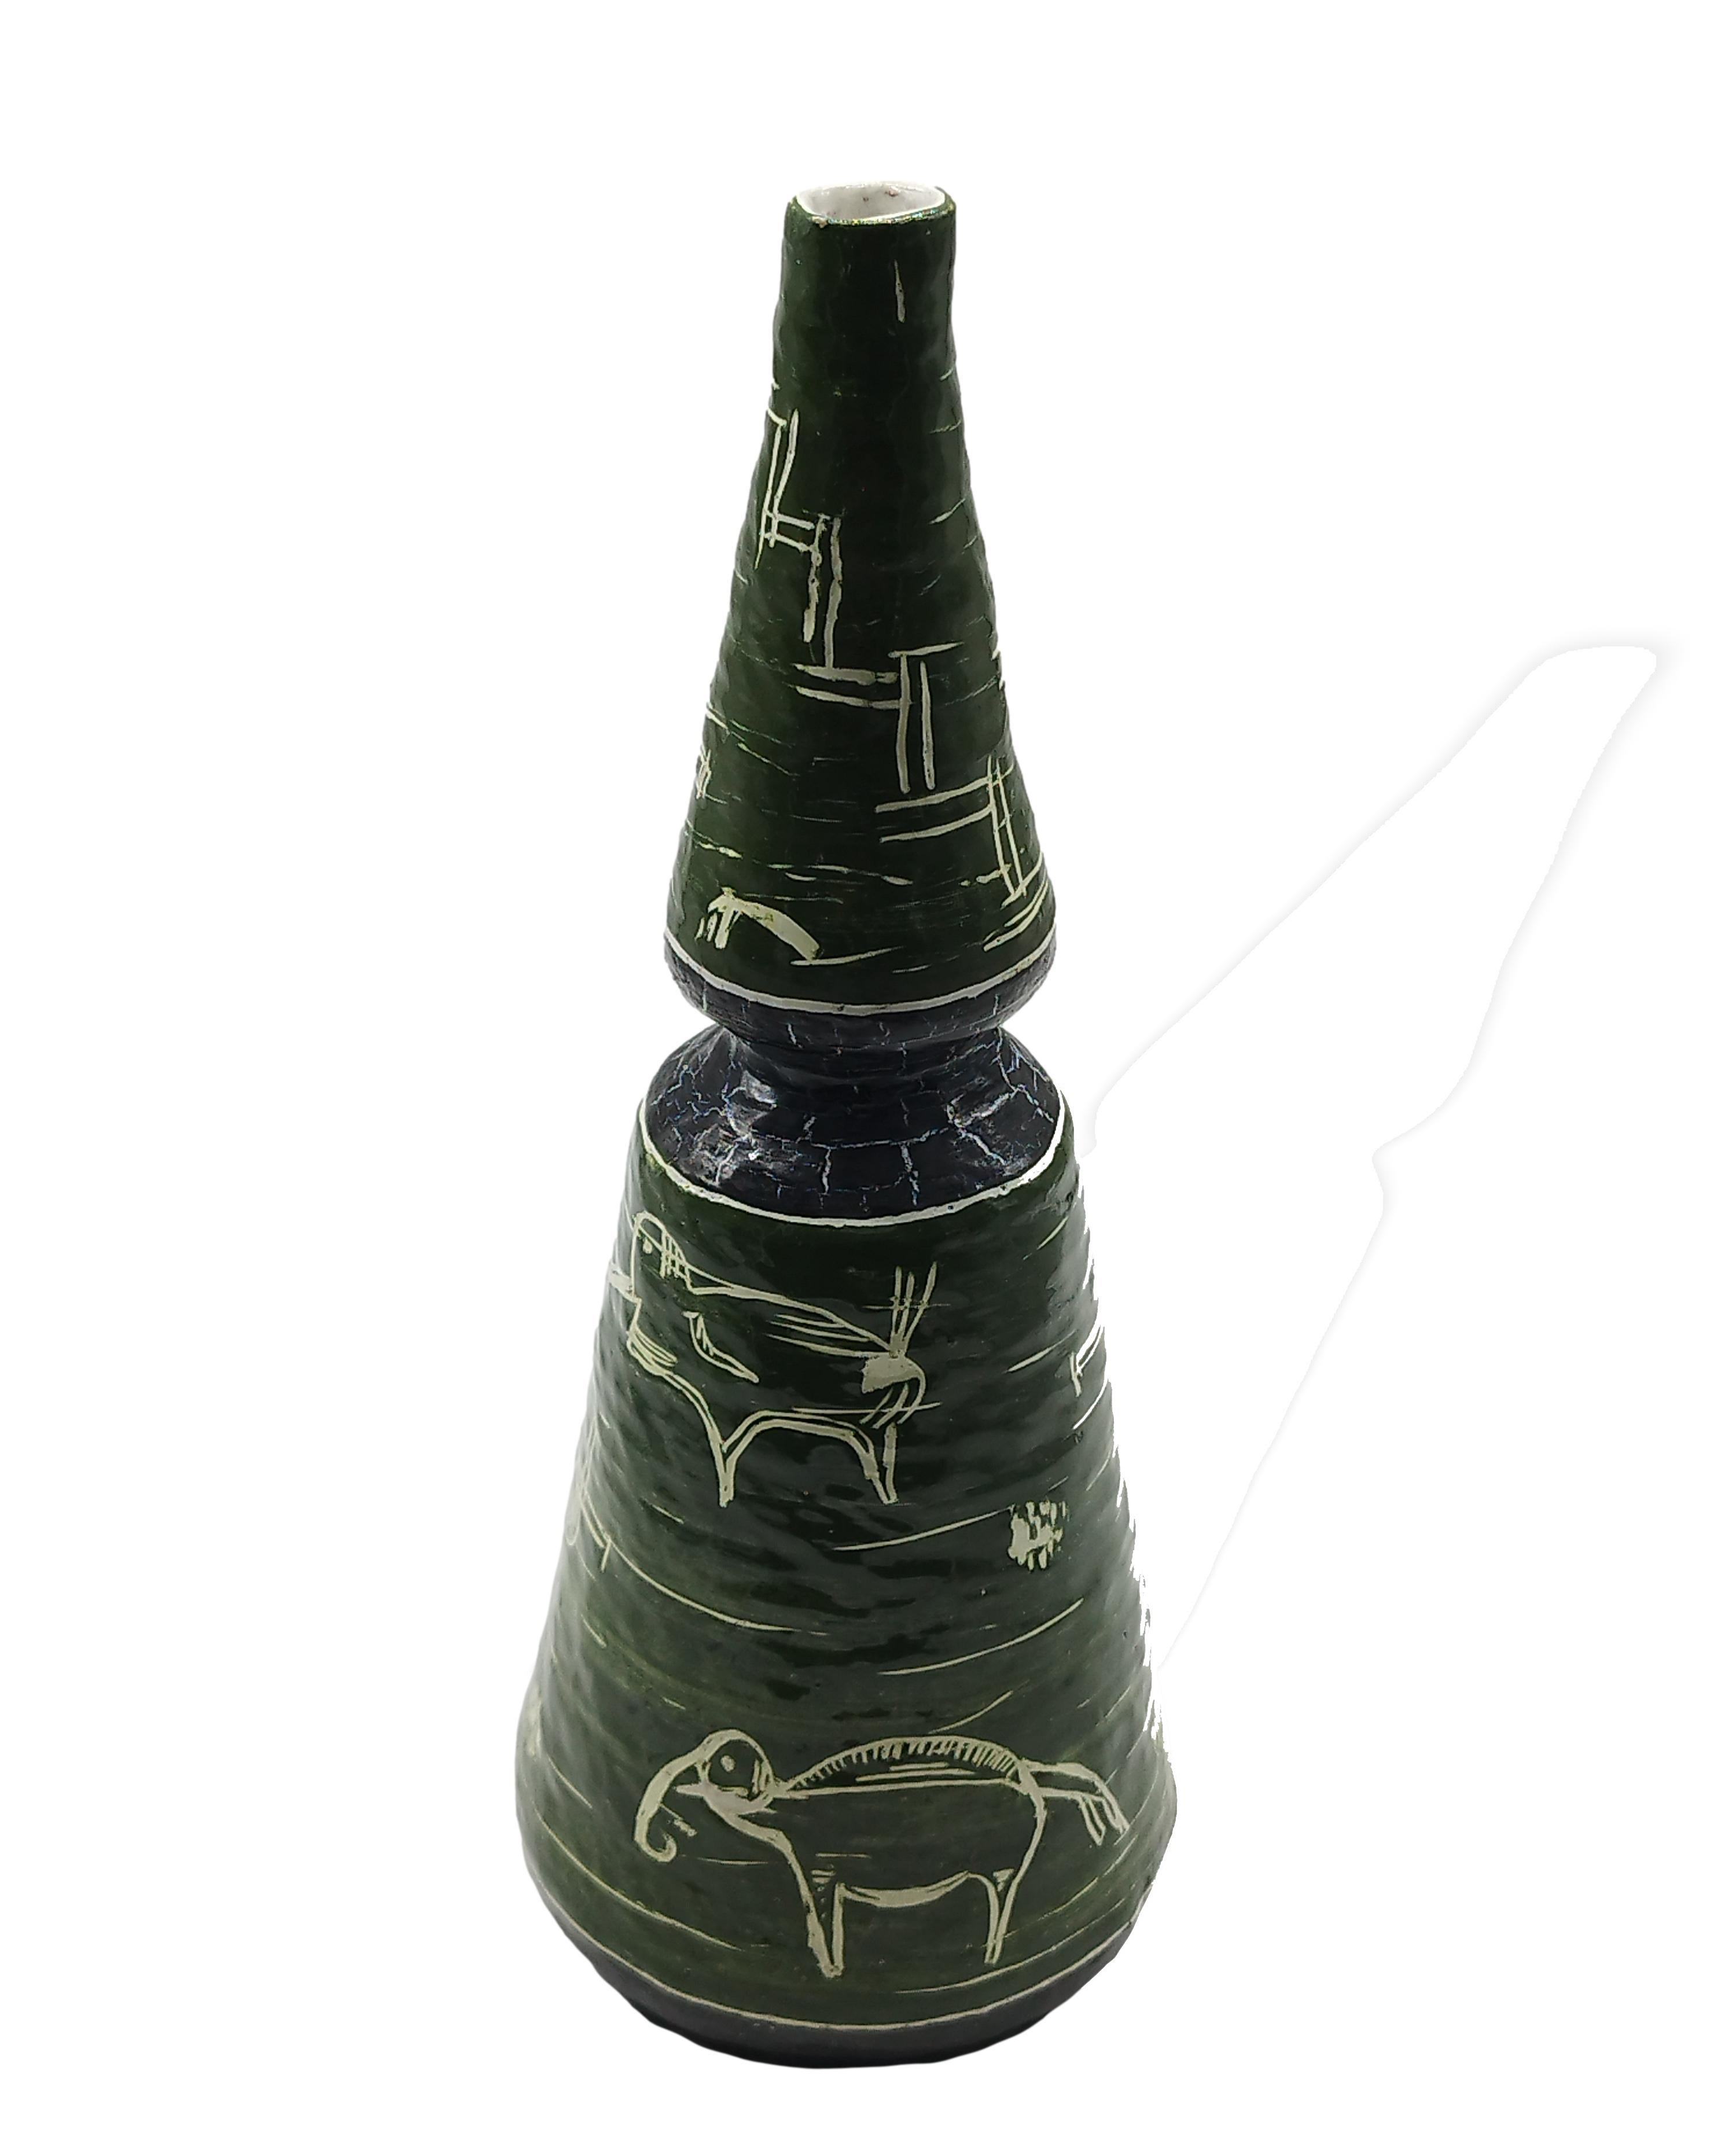 Single-flower vase/bottle in green glazed terracotta decorated with animal graffiti, signed below base G. Brunitto year 1950.